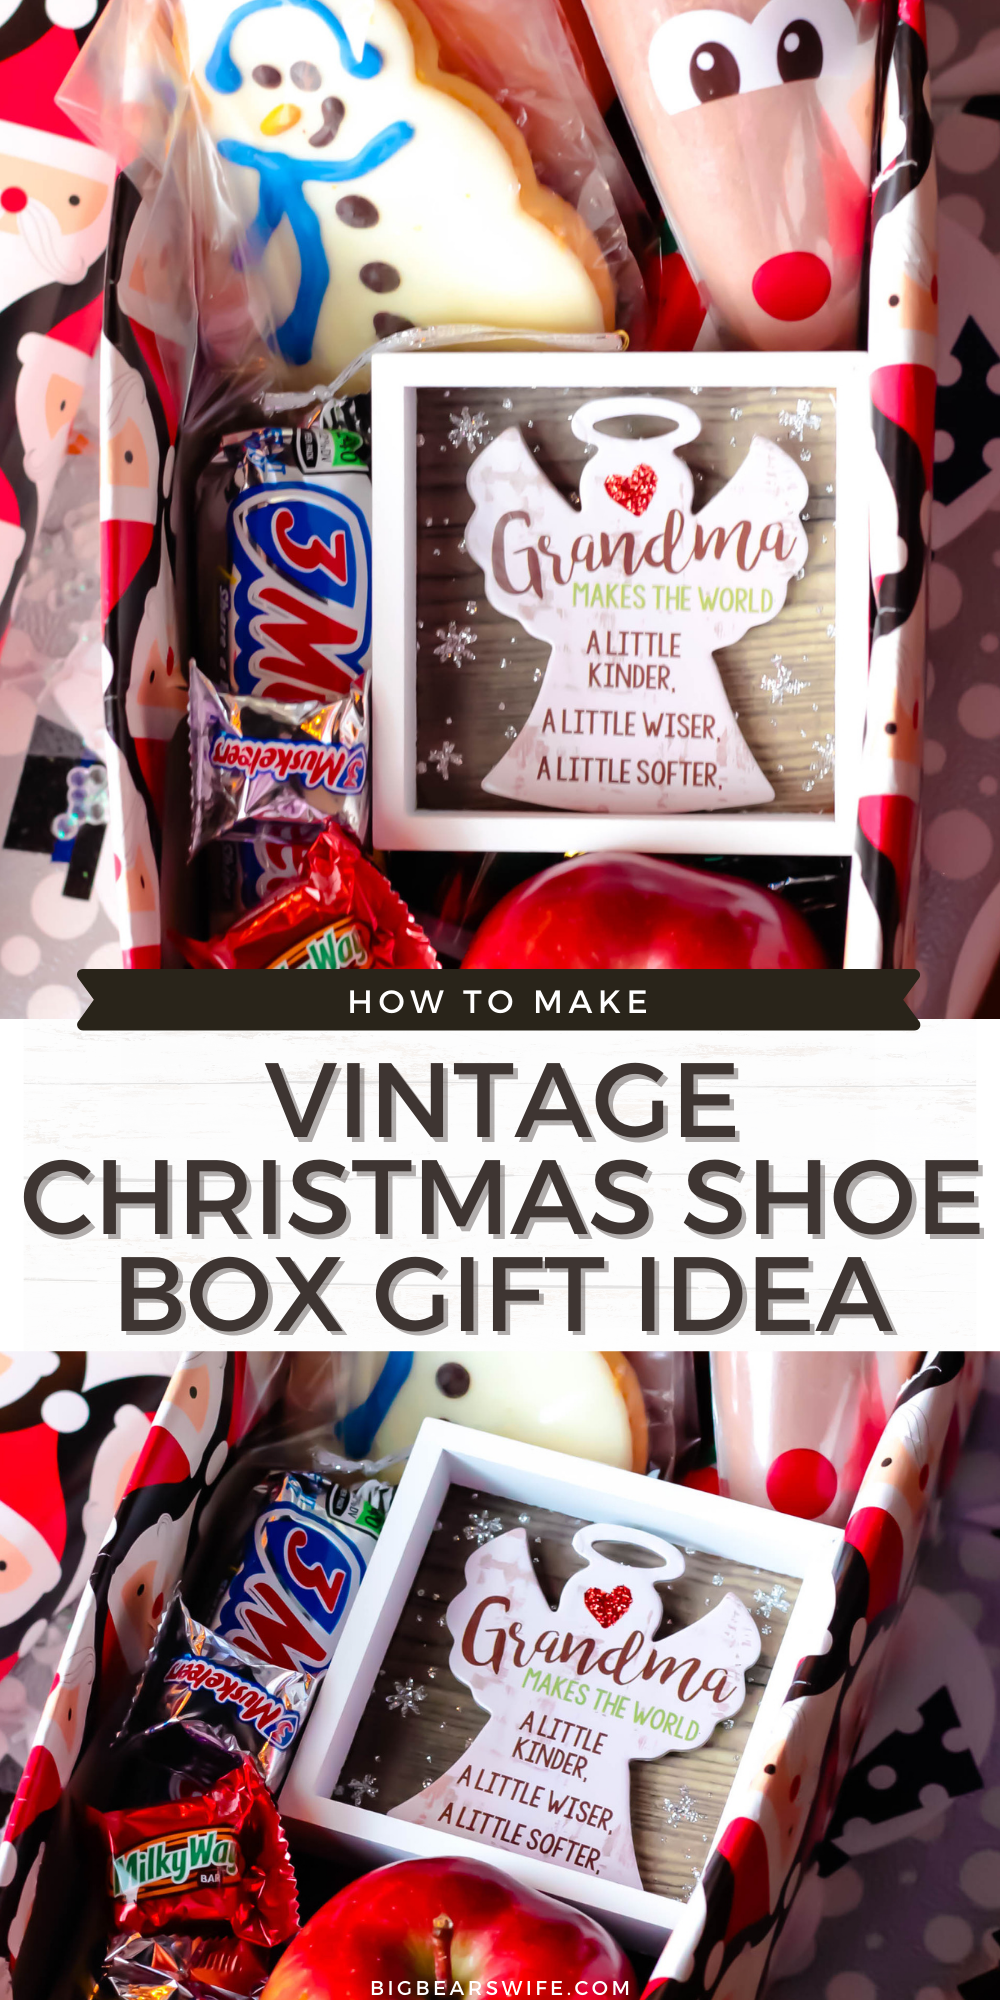 Want to bring back a sweet vintage Christmas tradition? Try this sweet Vintage Christmas Shoe Box Gift Idea! Fill it with candies, cookies and little gifts for a special person in your life! via @bigbearswife